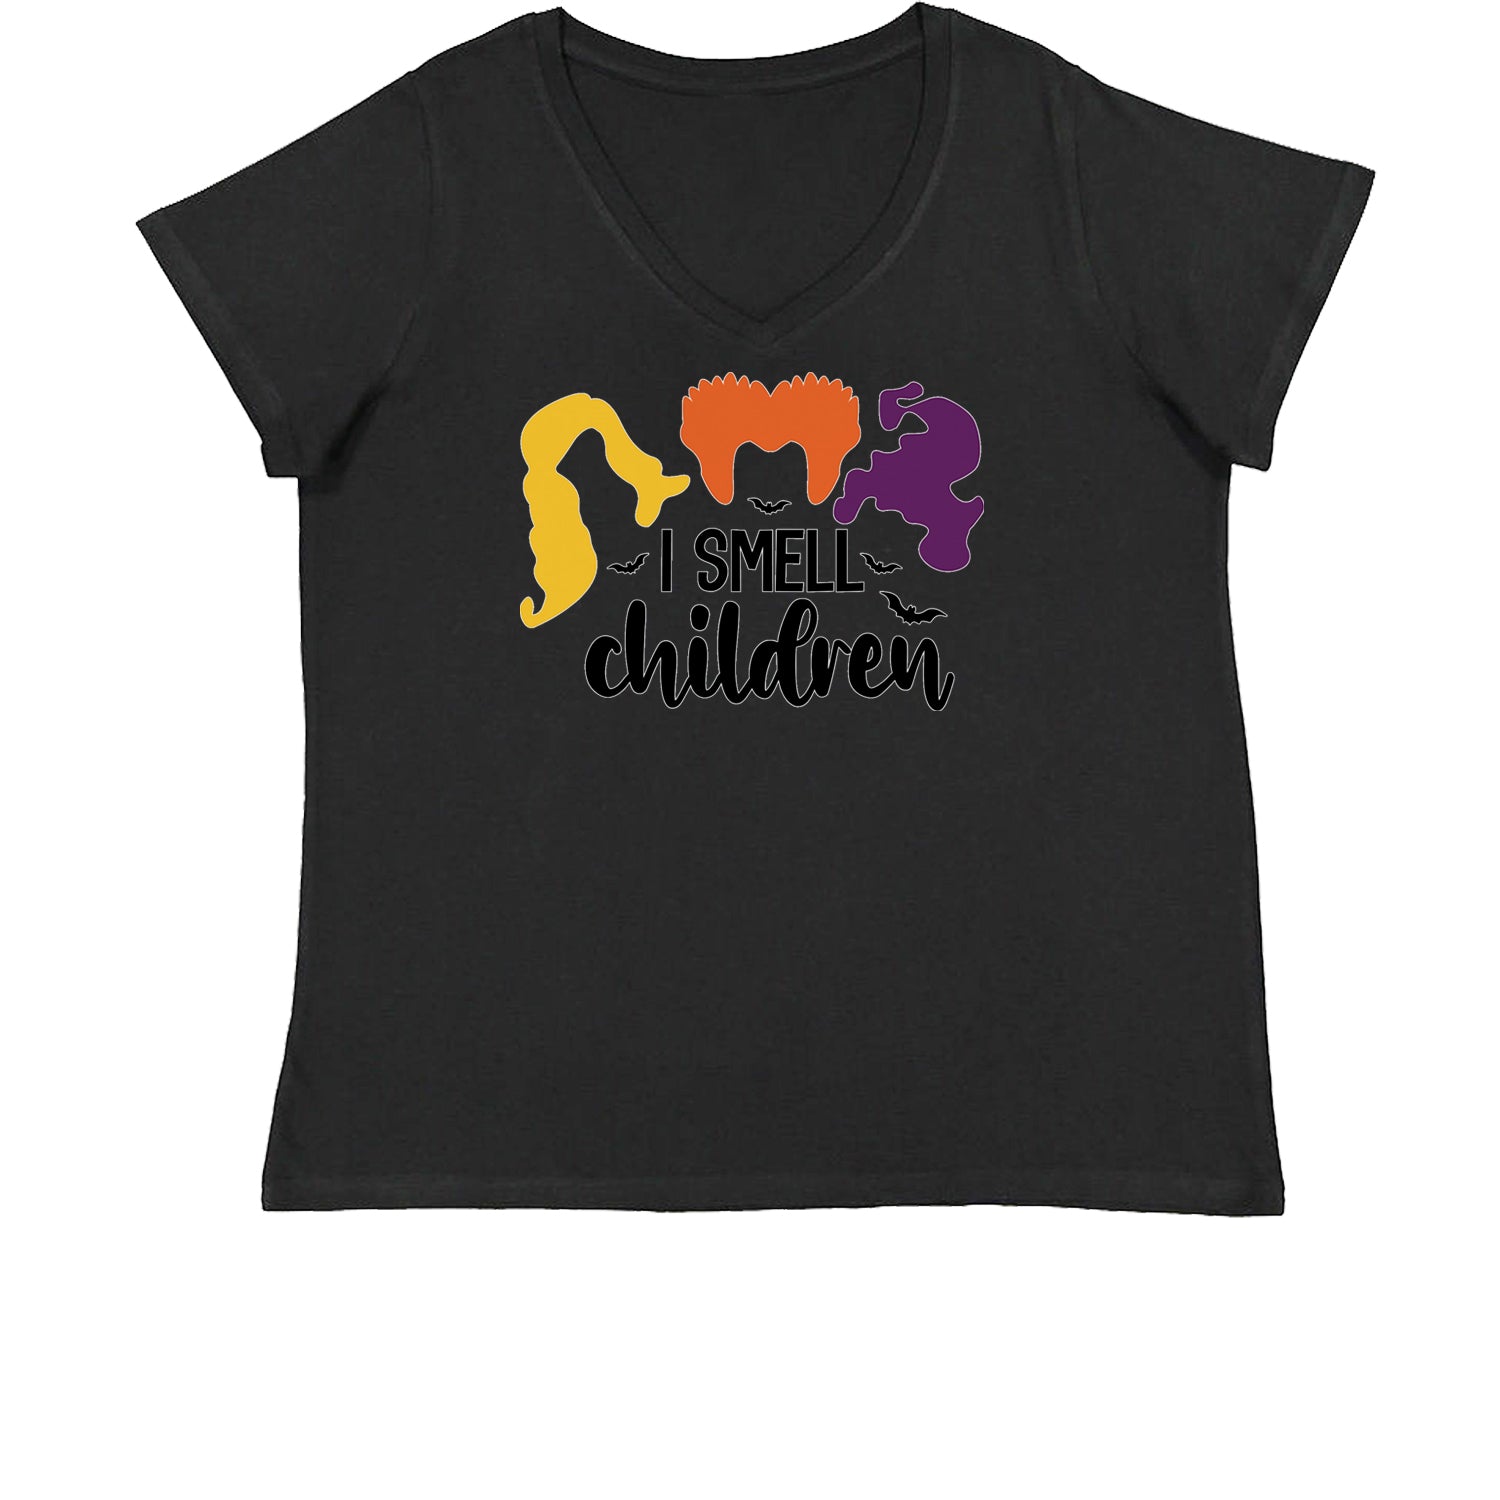 I Smell Children Hocus Pocus Womens Plus Size V-Neck T-shirt descendants, enchanted, eve, hallows, hocus, or, pocus, sanderson, sisters, treat, trick, witches by Expression Tees